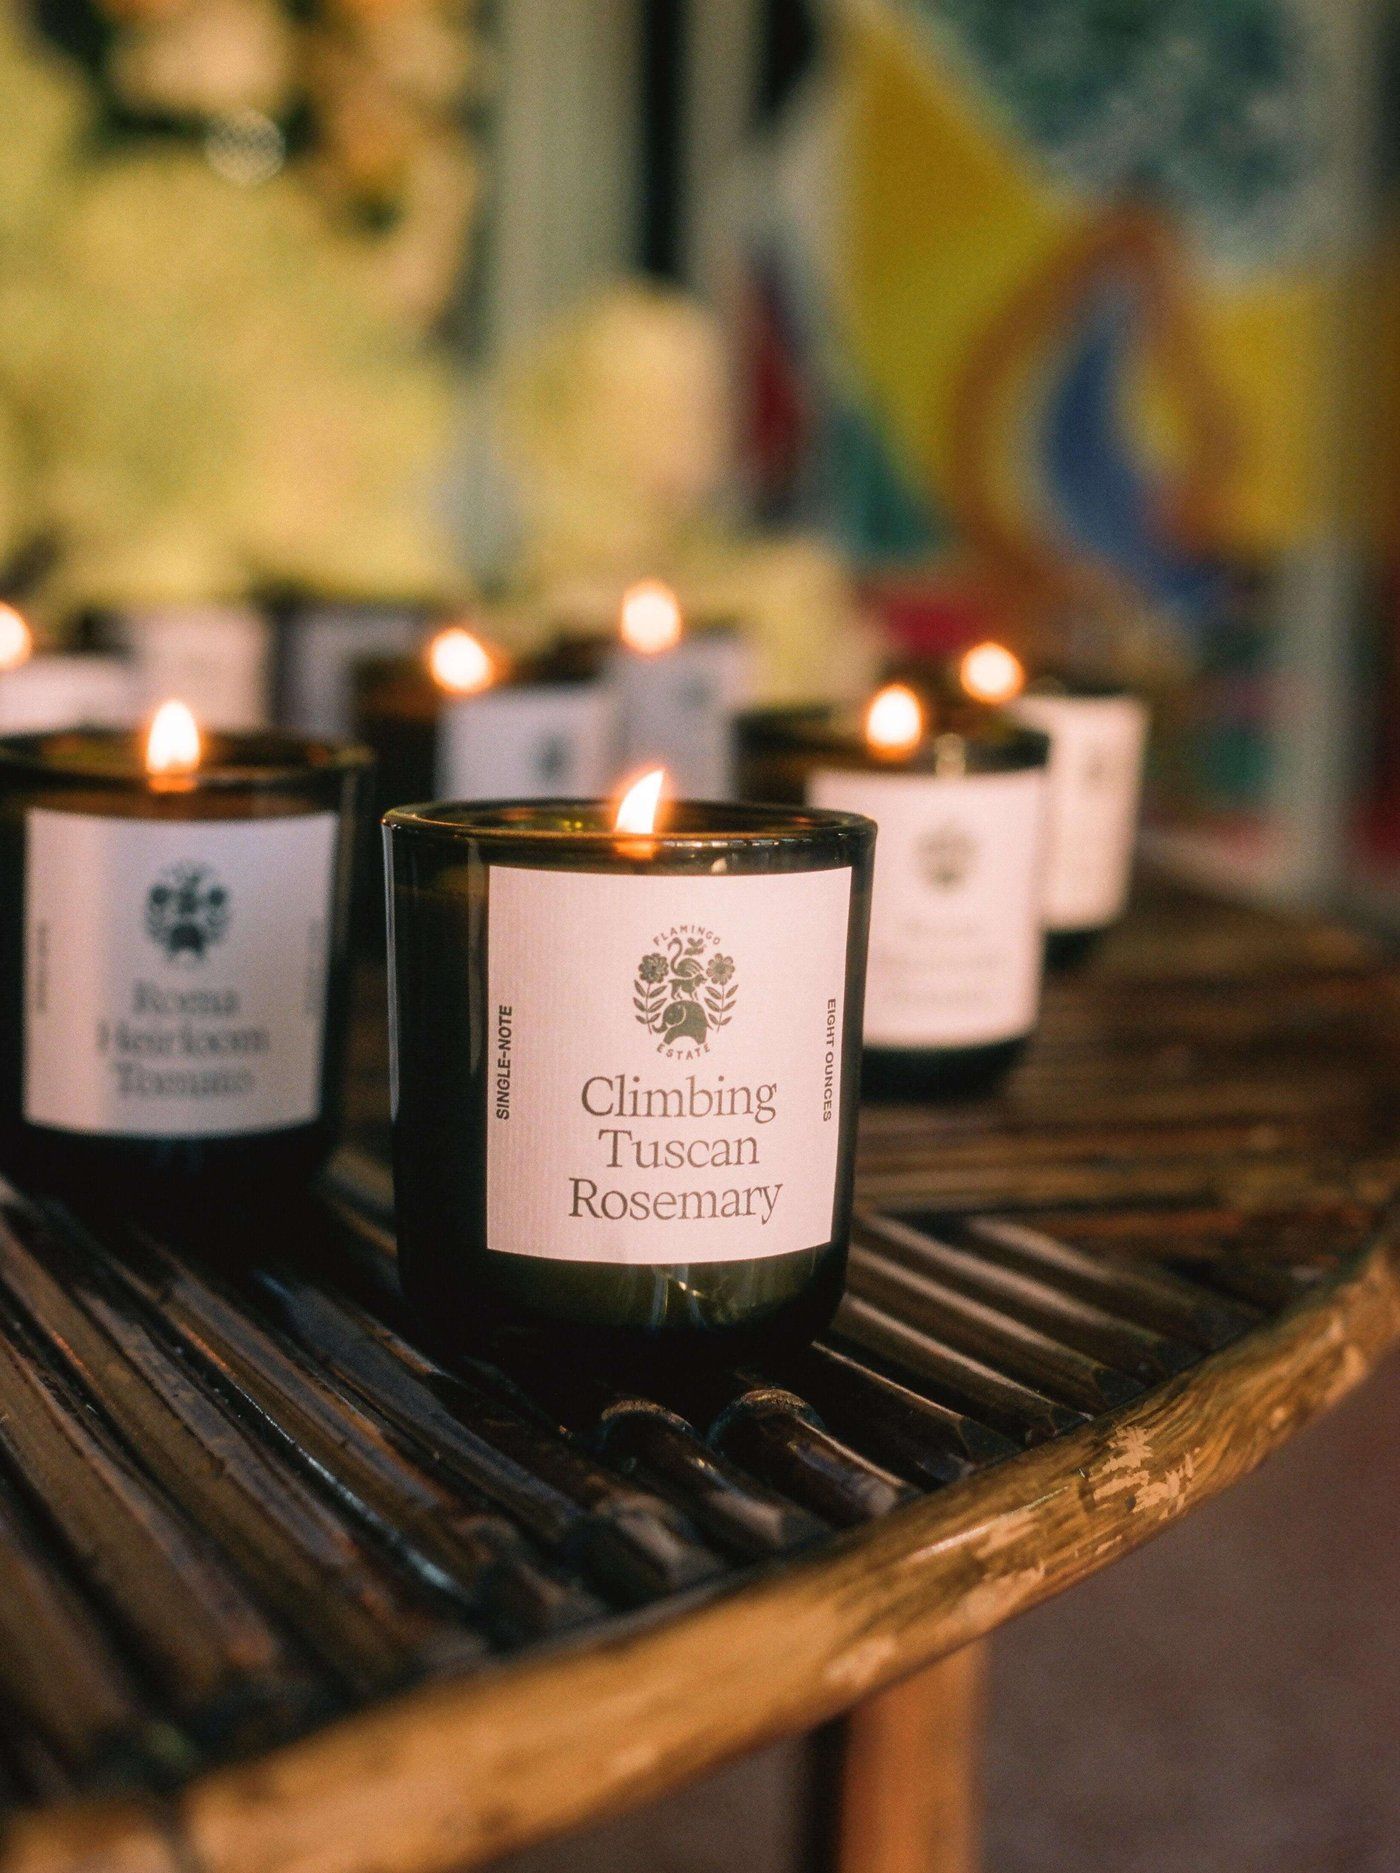 Product Image for Climbing Tuscan Rosemary Candle